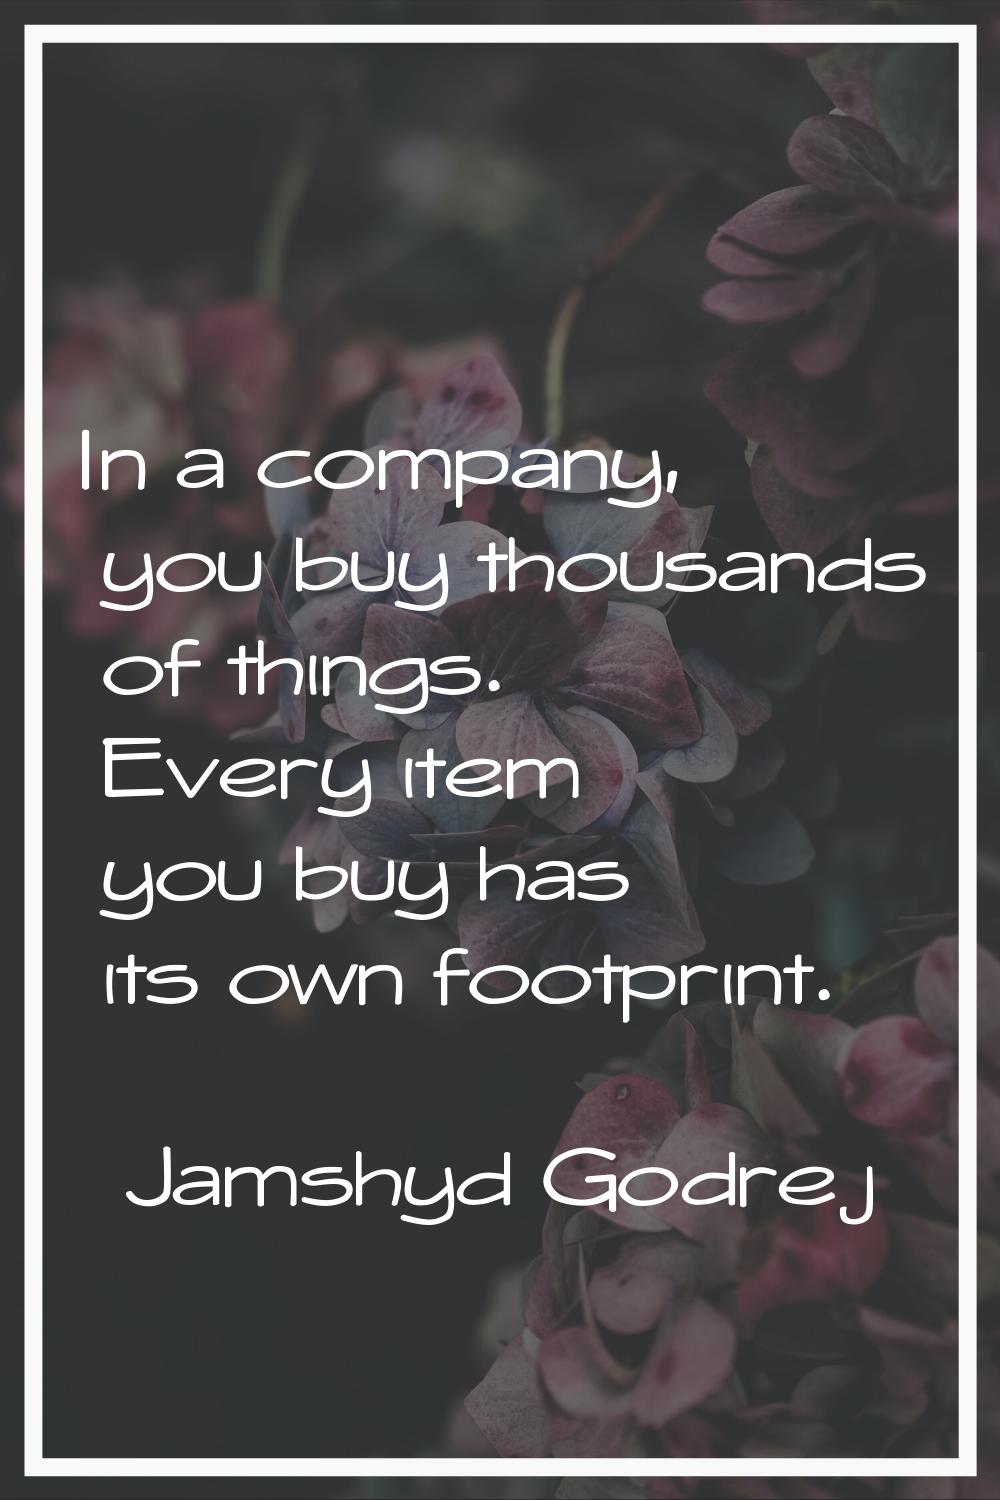 In a company, you buy thousands of things. Every item you buy has its own footprint.